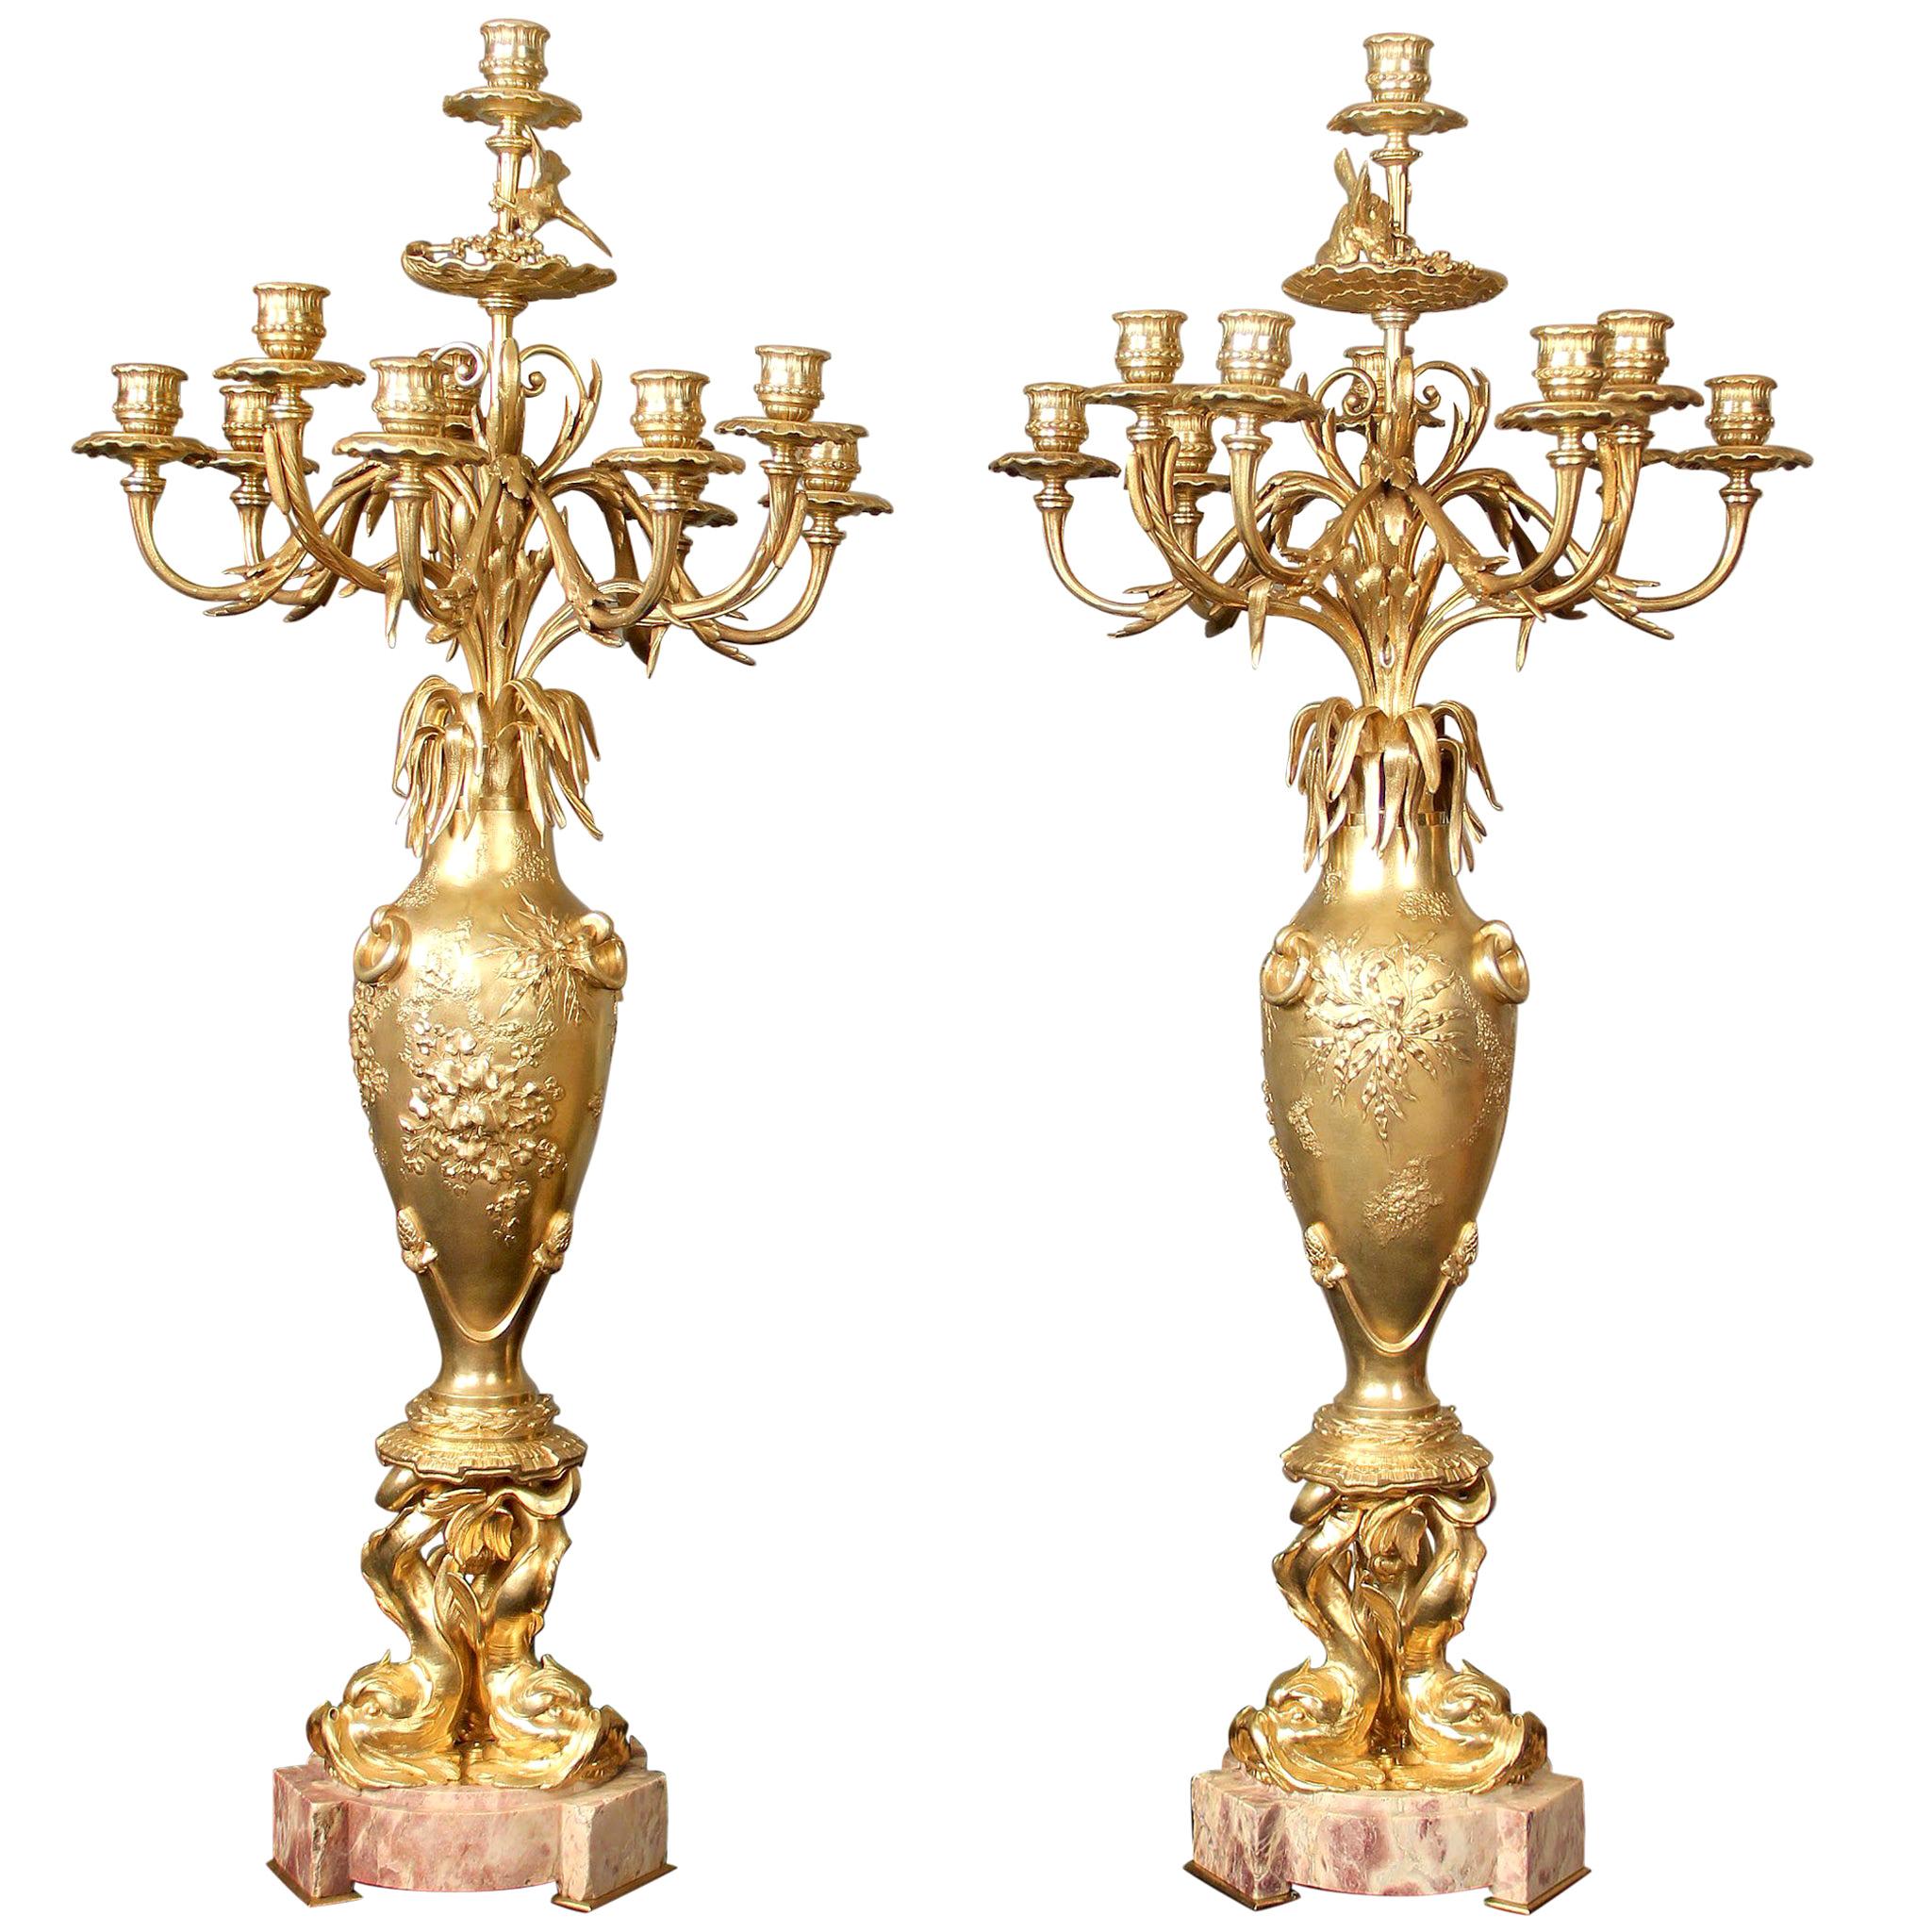 Pair of 19th Century Gilt Bronze "Japonisme" Candelabra by Maison Marnyhac For Sale